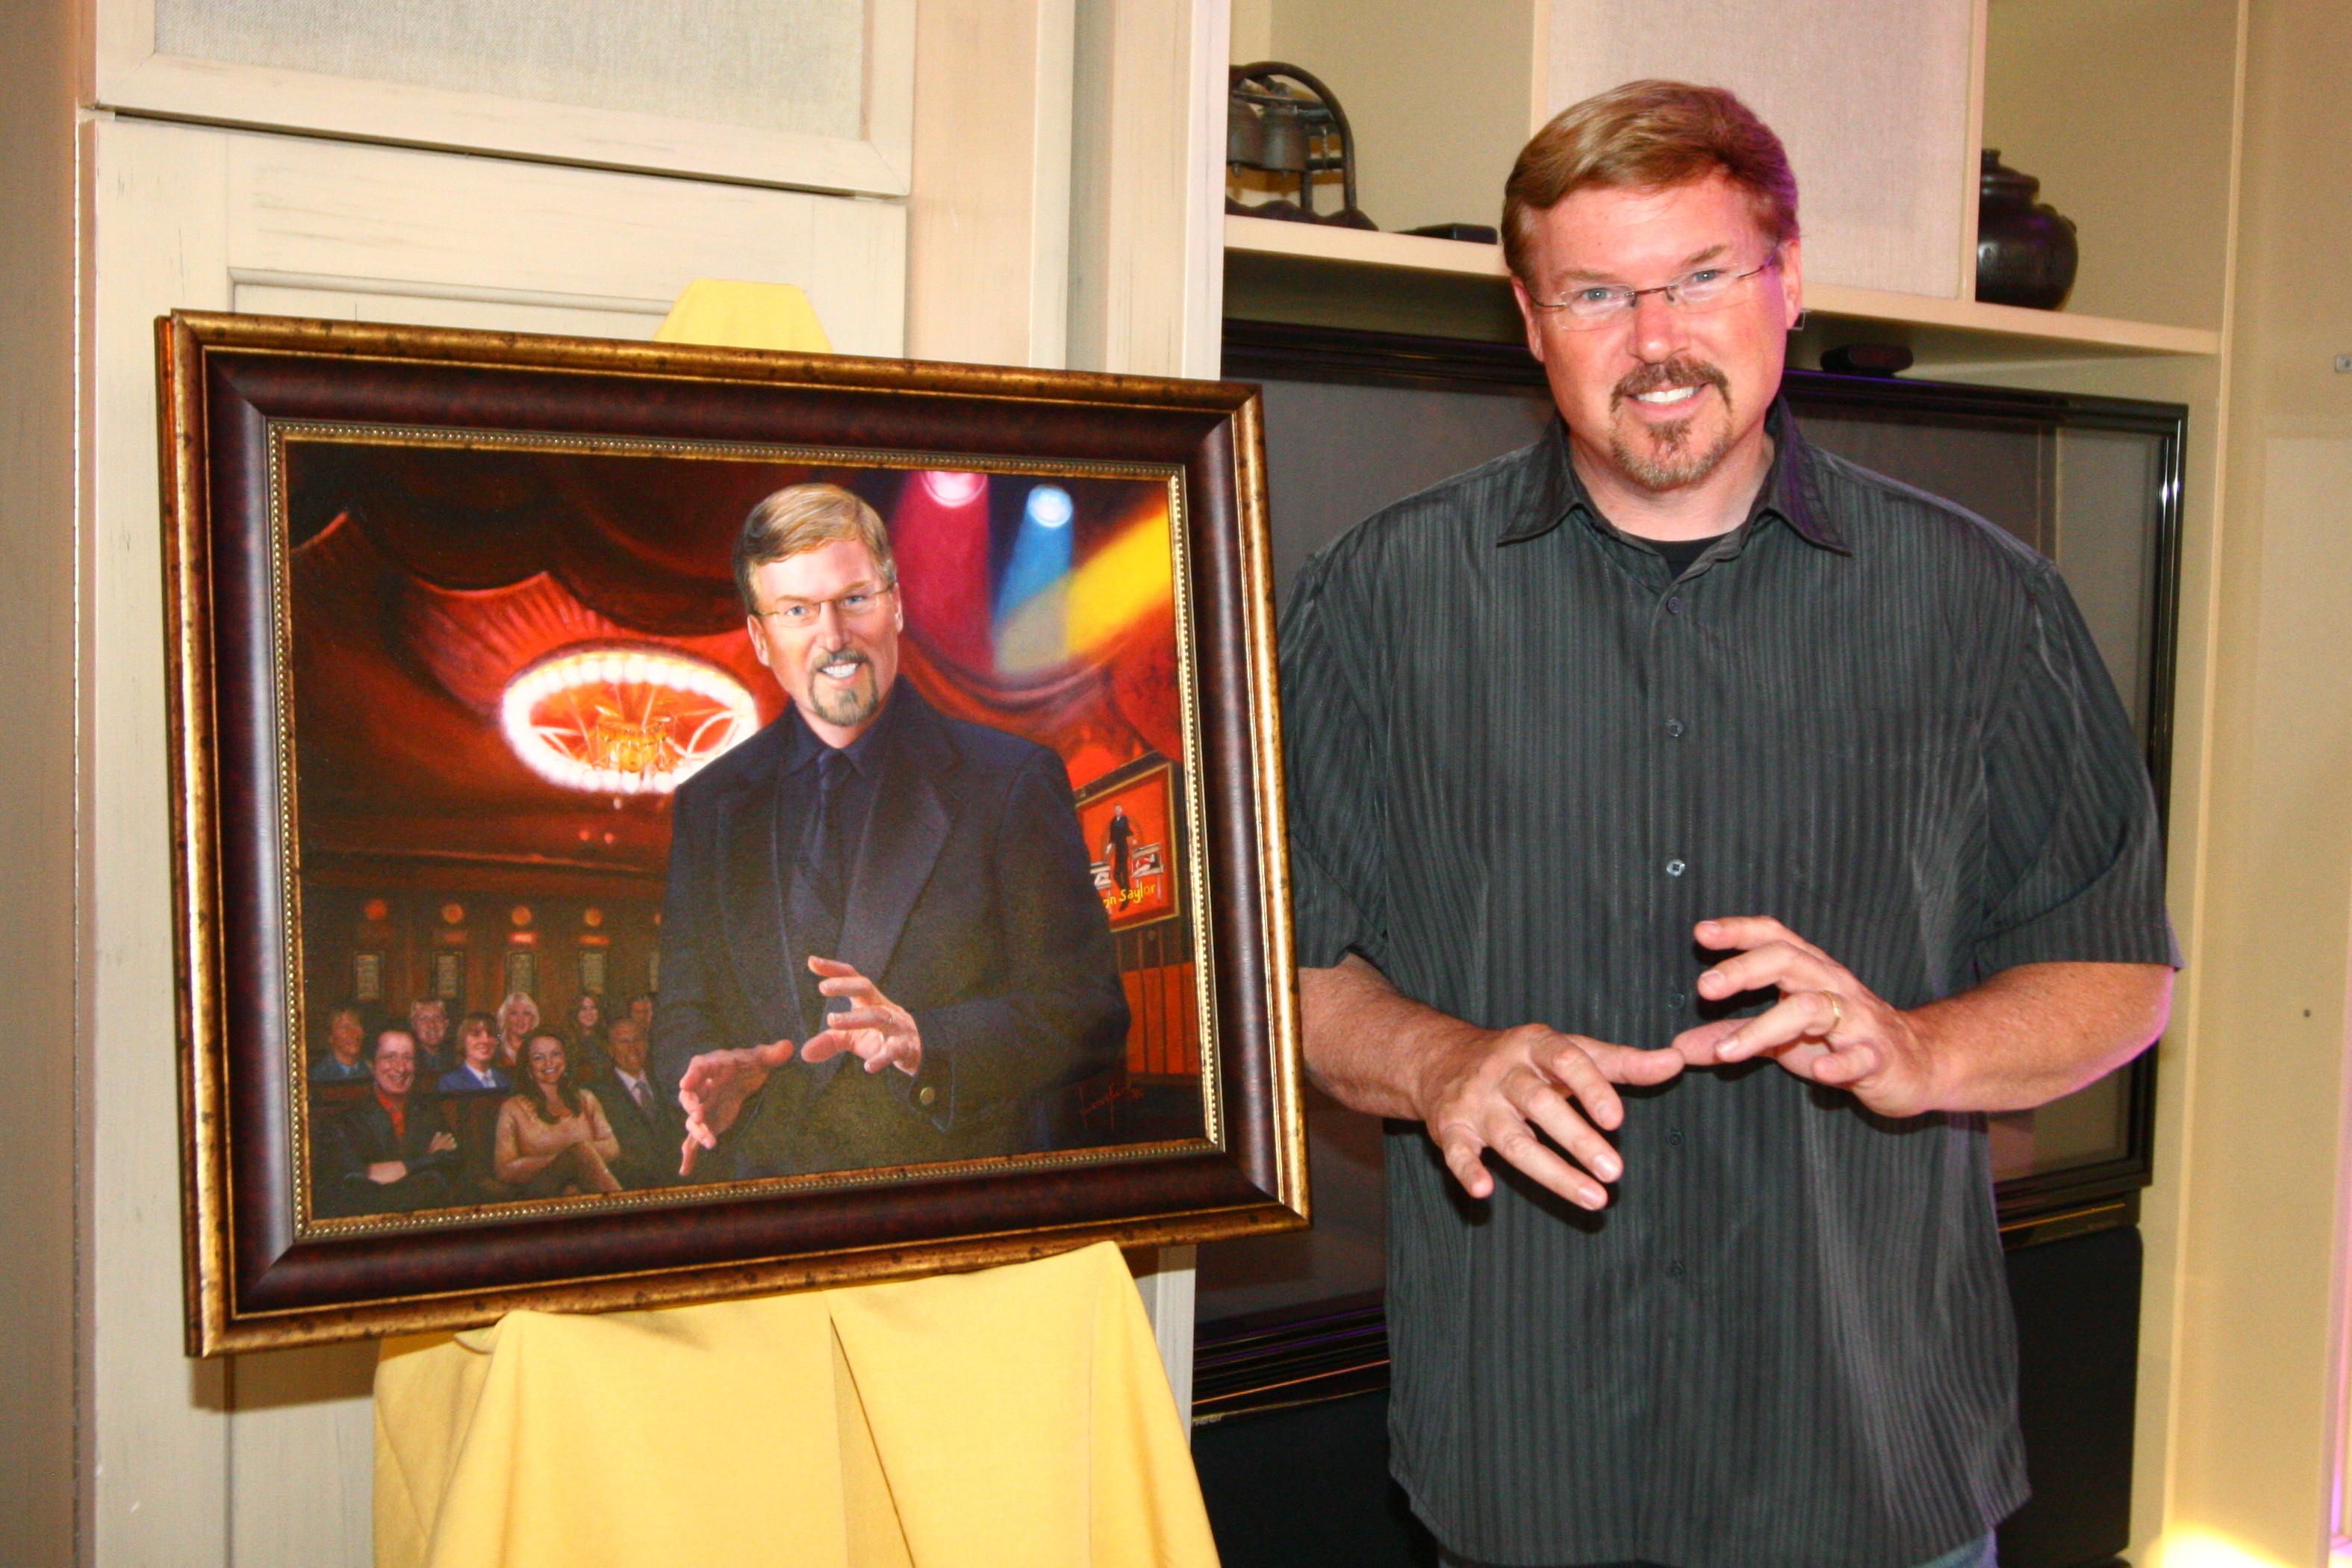 gifted this incredible painting of me performing at The Magic Castle